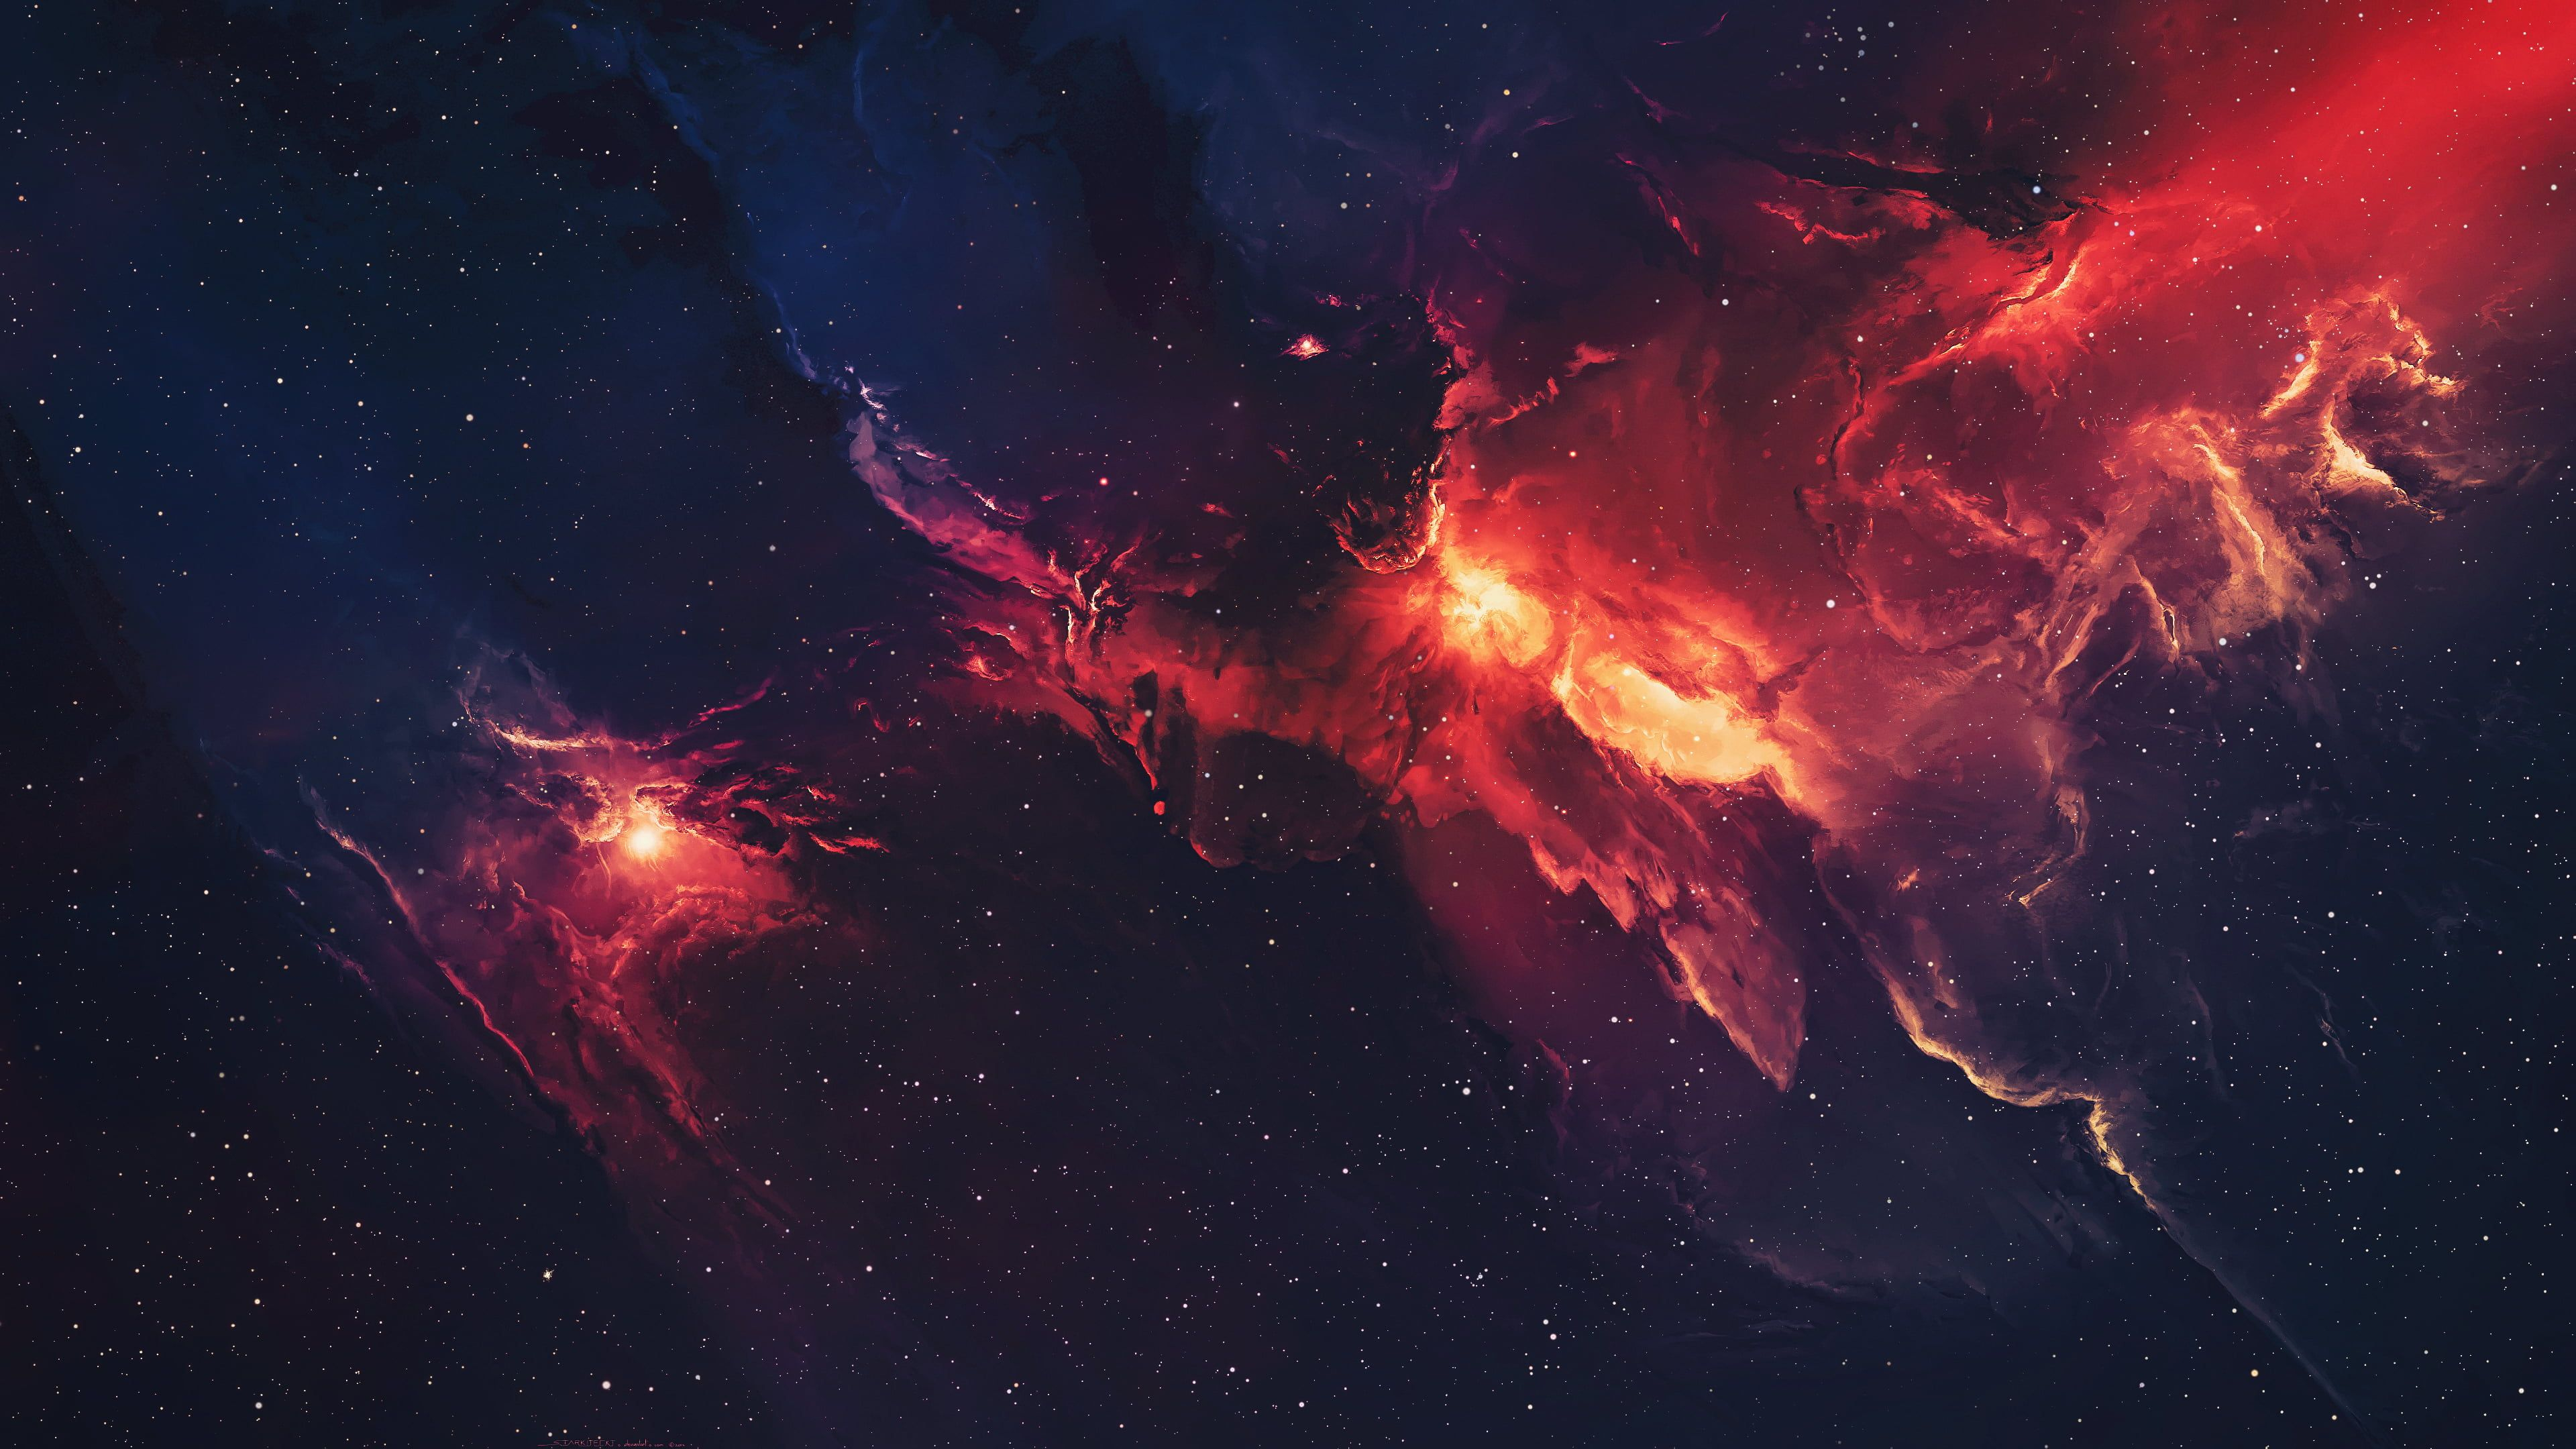 3840x2160 red galaxy, untitled #galaxy #space #stars #universe #spacescapes #nebula #4K #wallpaper #hdwallpaper #desktop | Nebula wallpaper, Nebula, Star wallpaper